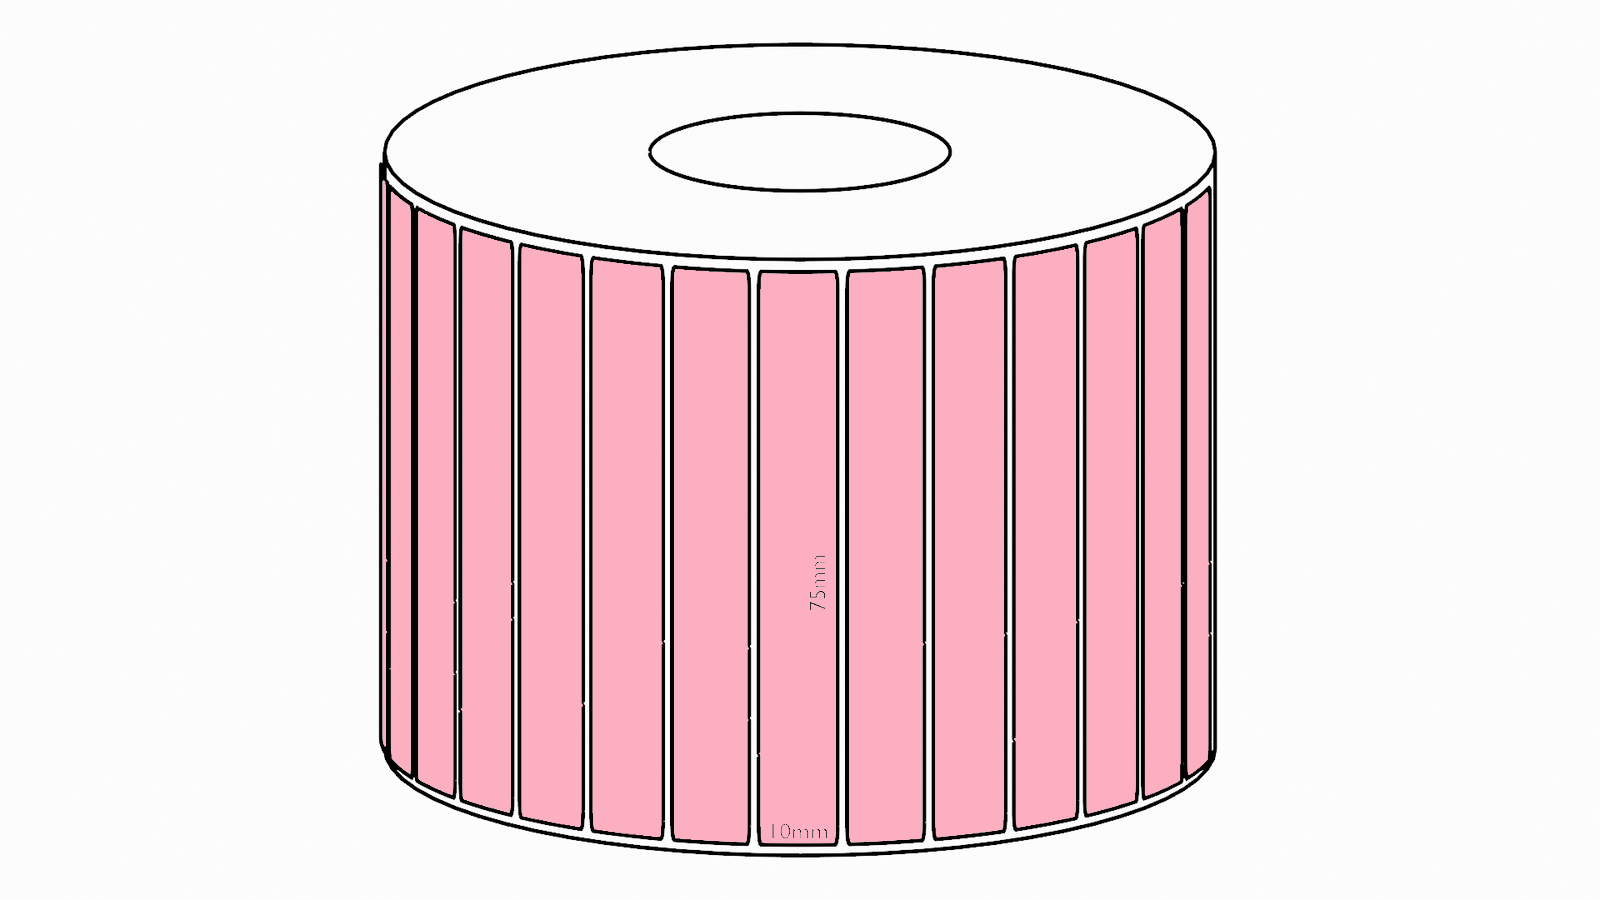 75x10mm Pink Direct Thermal Permanent Label, 3850 per roll, 38mm core